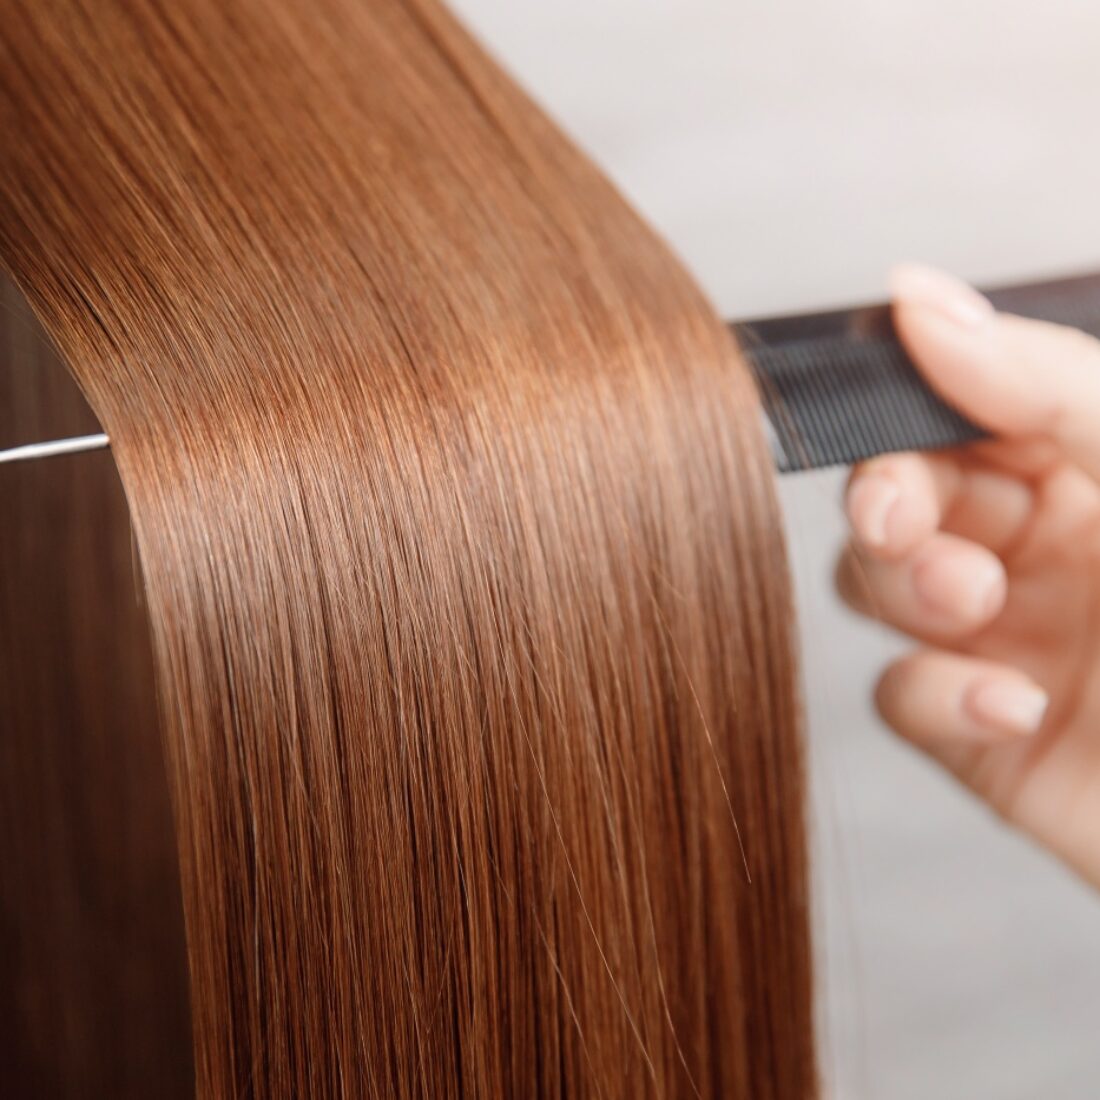 A protein copied from insects can straighten hair safely - ISRAEL21c